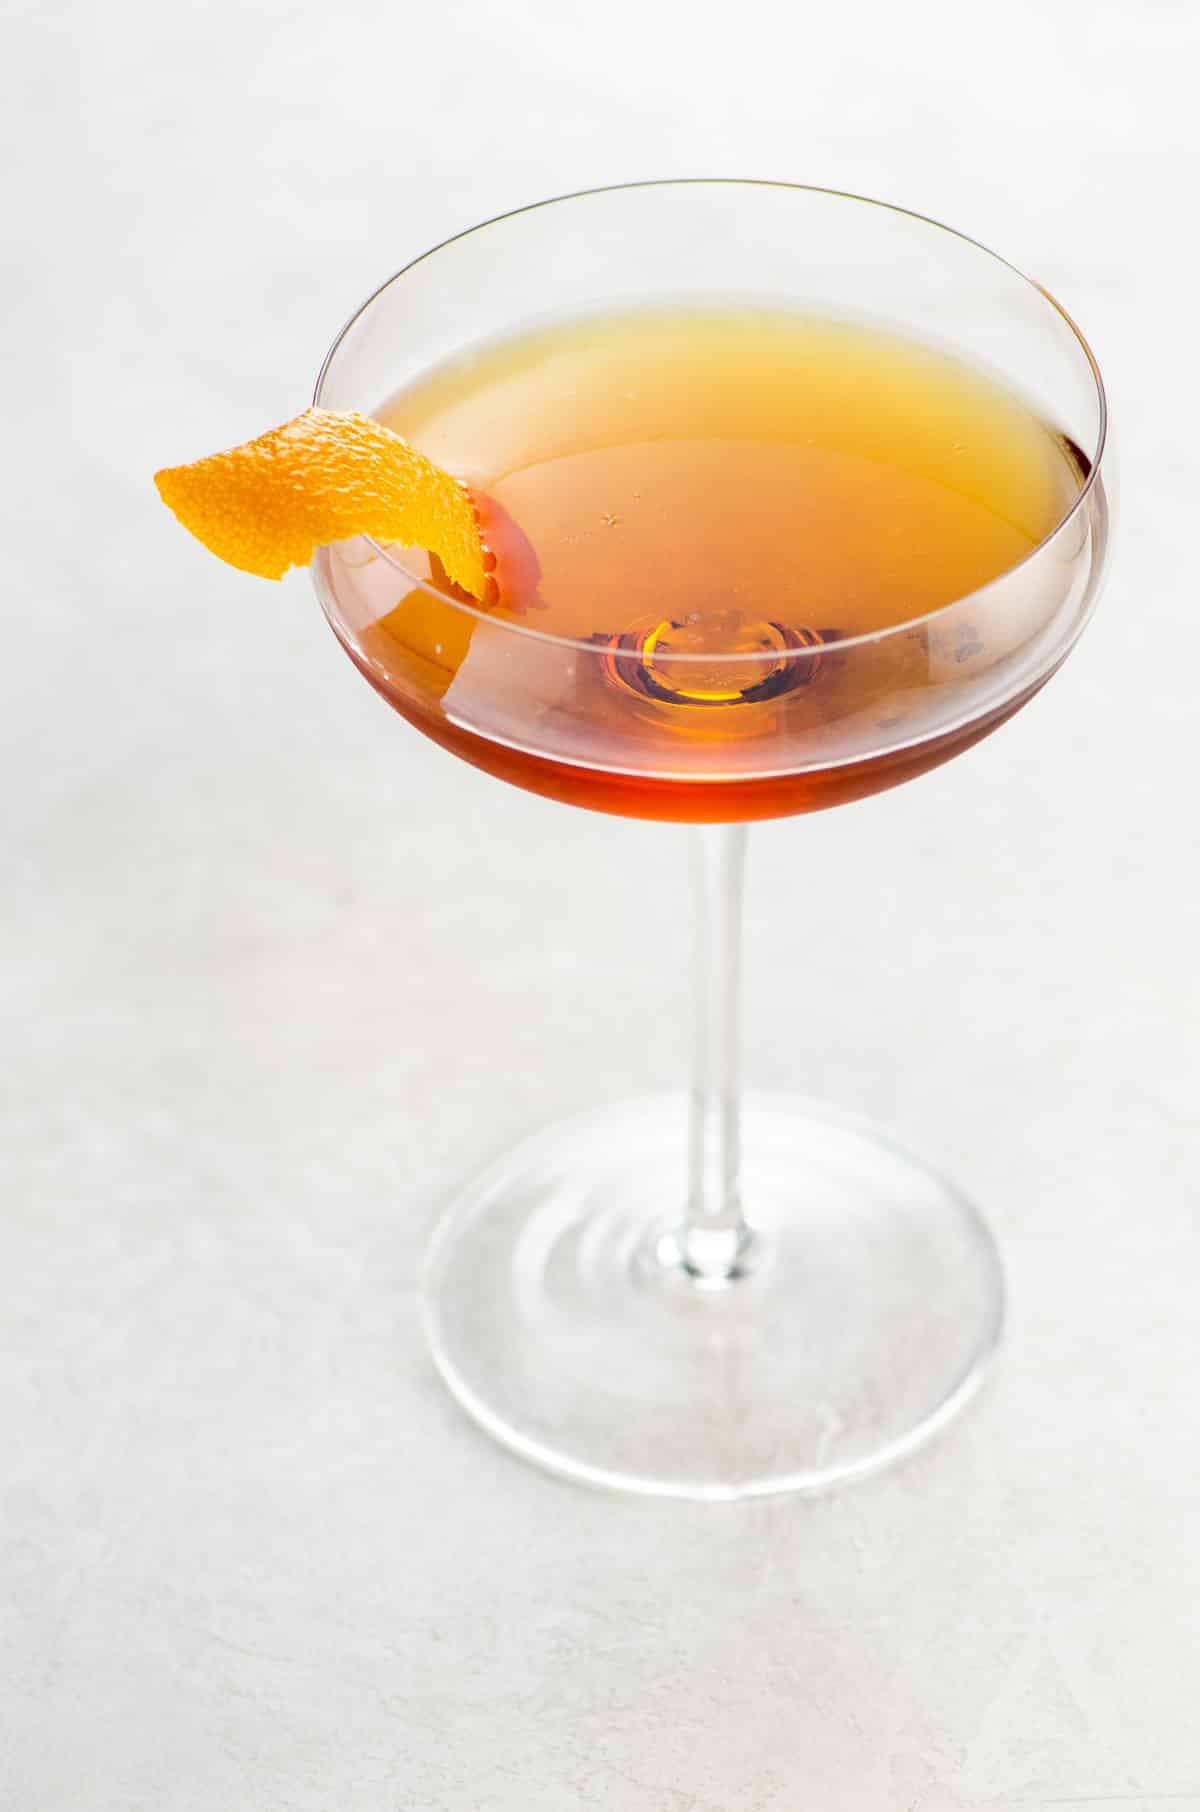 Martinez cocktail recipe with gin, luxardo, and sweet vermouth in a coupe glass garnished with an orange twist